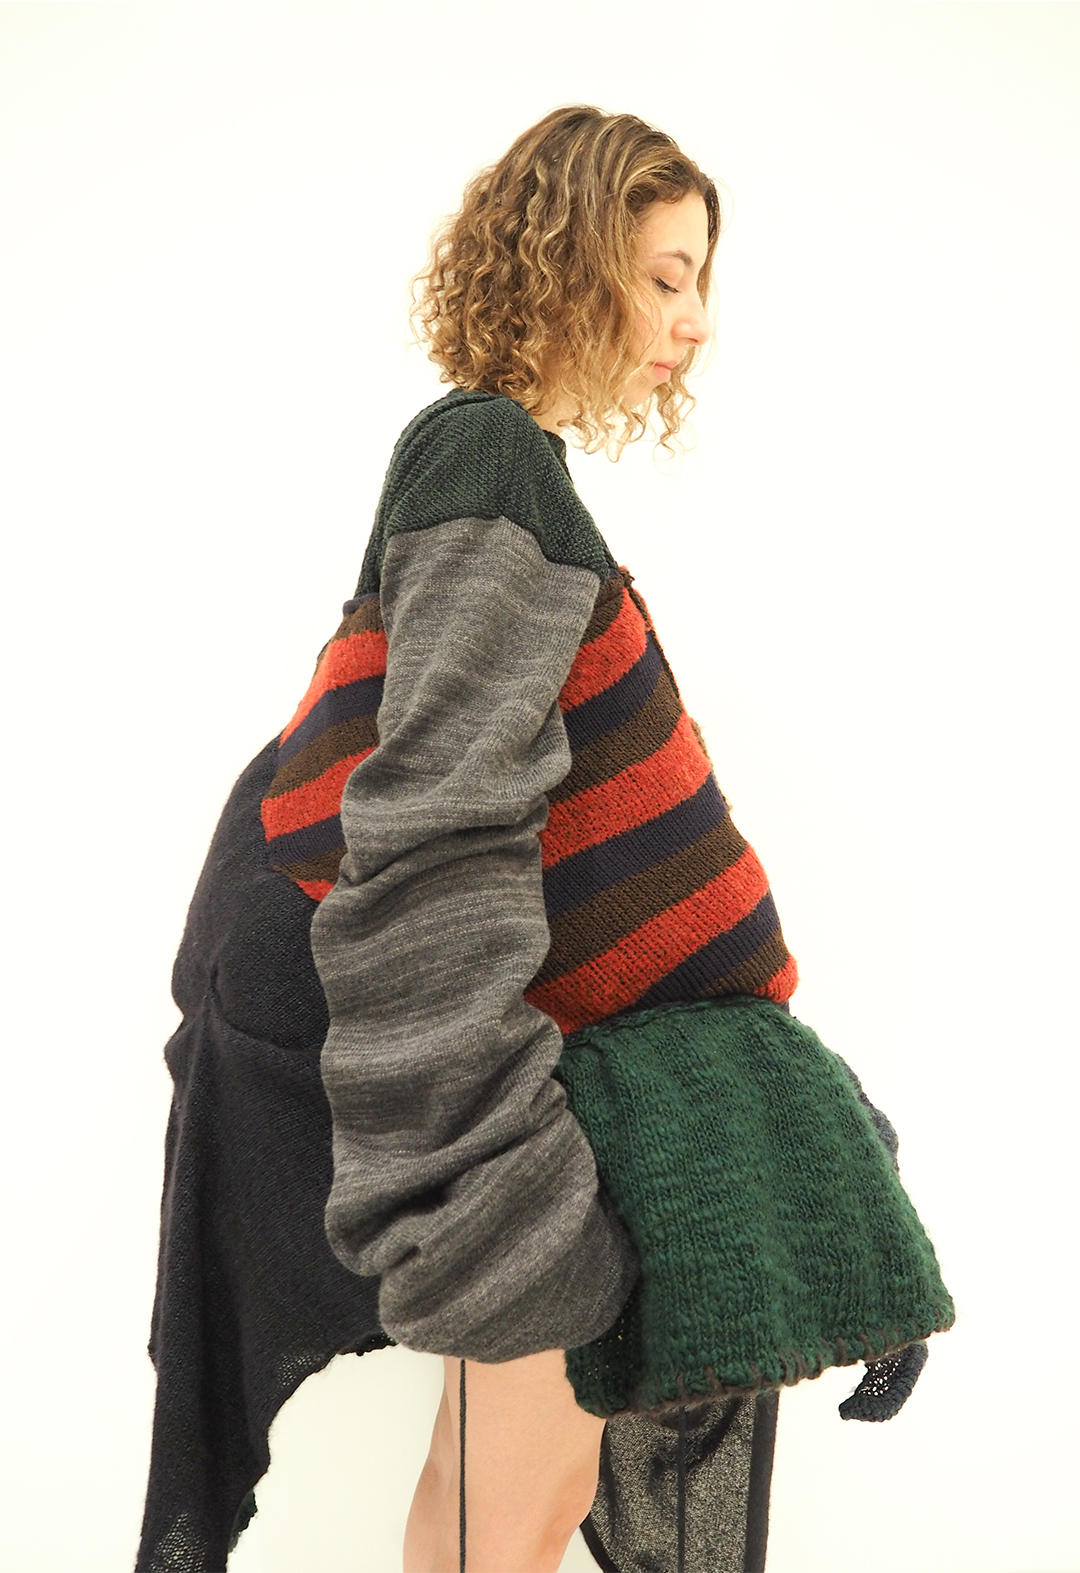 The photo shows a side view of a distorted patchwork dress and the construction of a pleated oversized sleeve. 